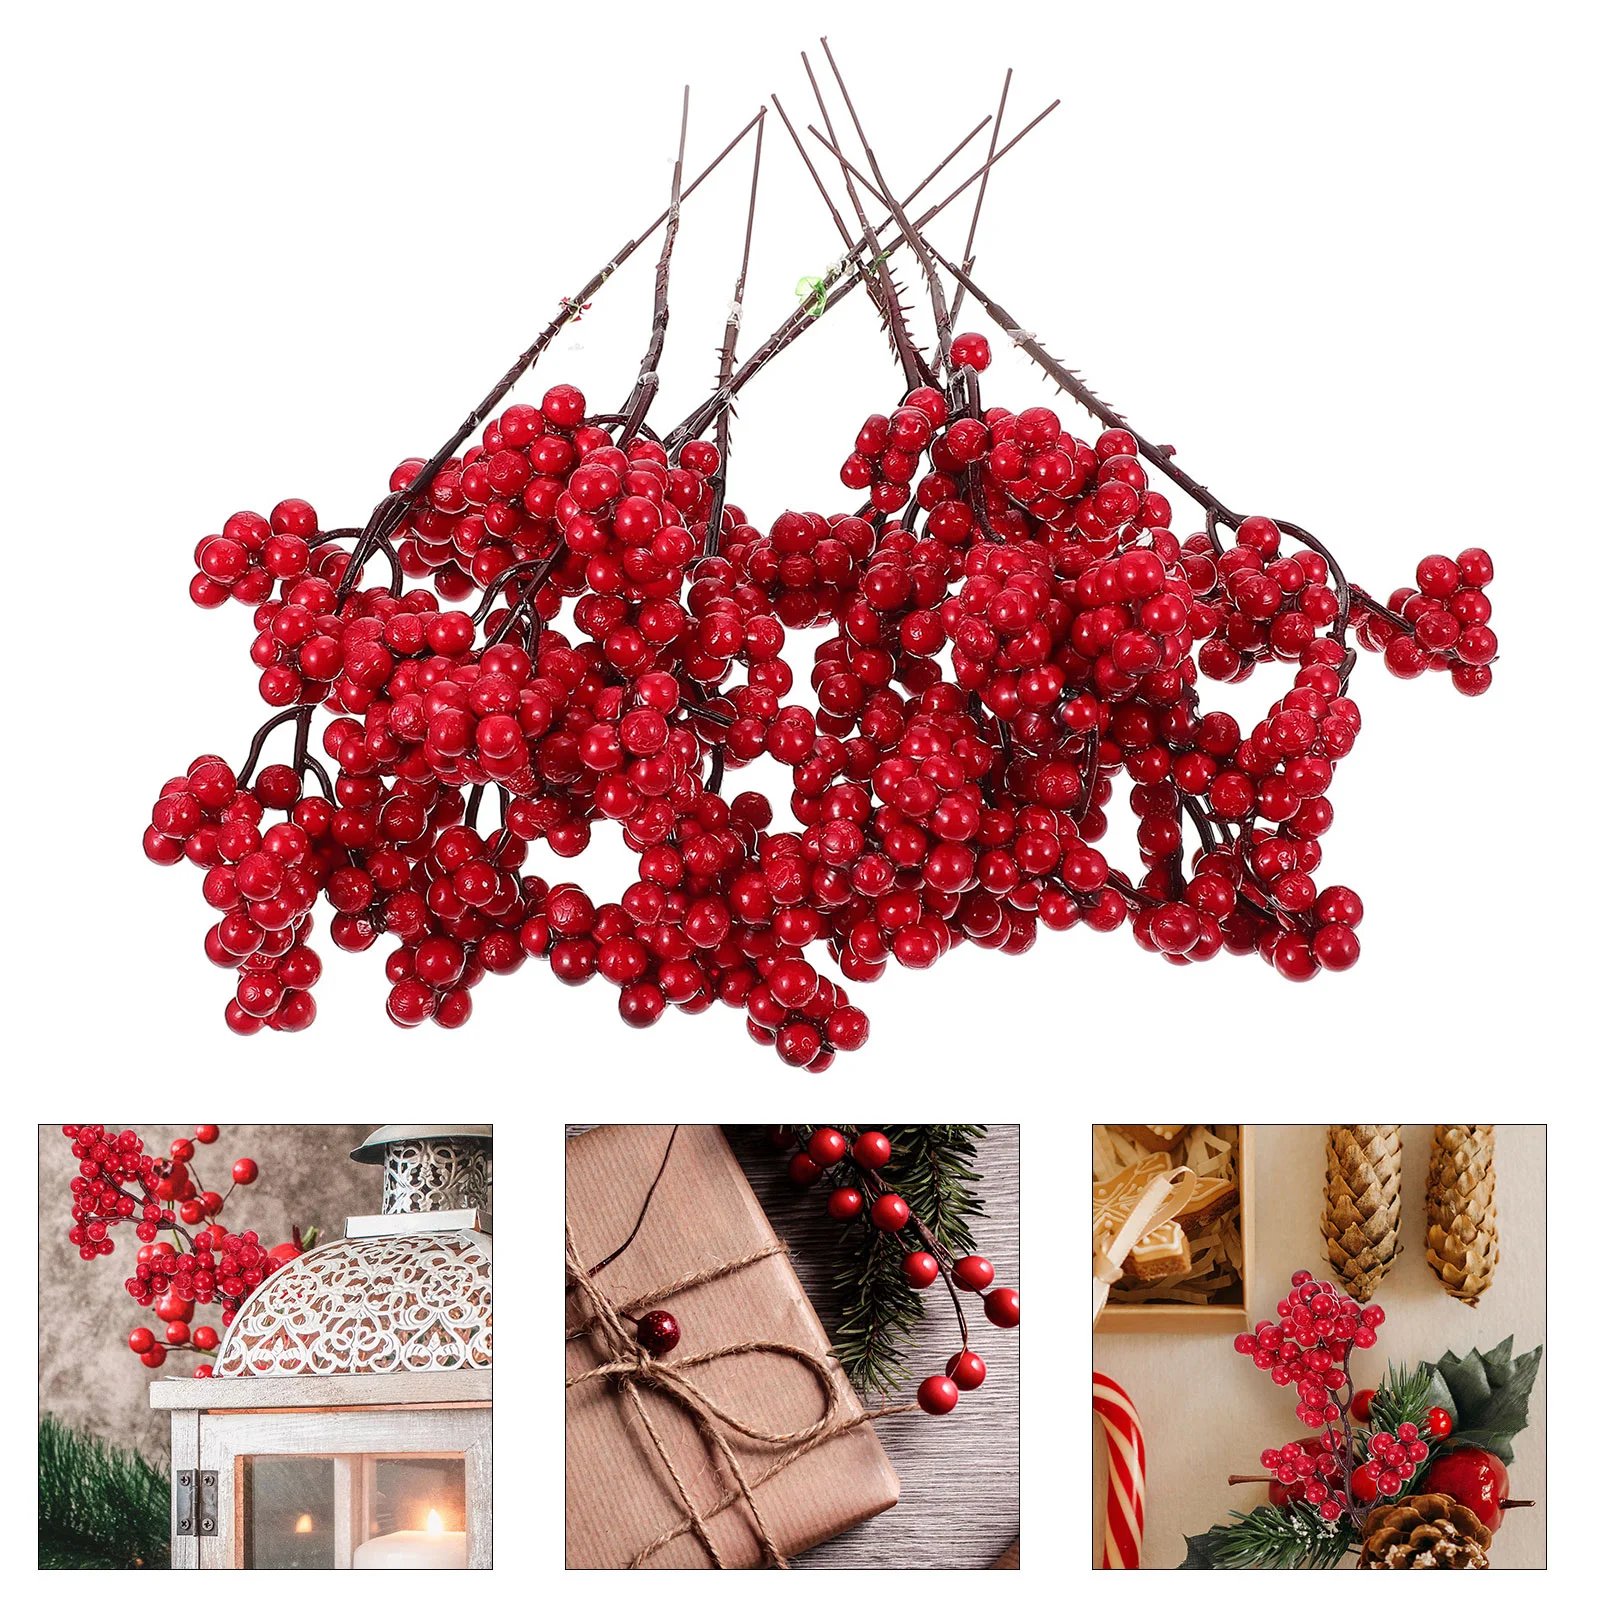 

Berry Christmas Red Berries Artificial Stems Branch Decor Tree Picks Branches Holly Fake Decorations Simulation Pick Faux